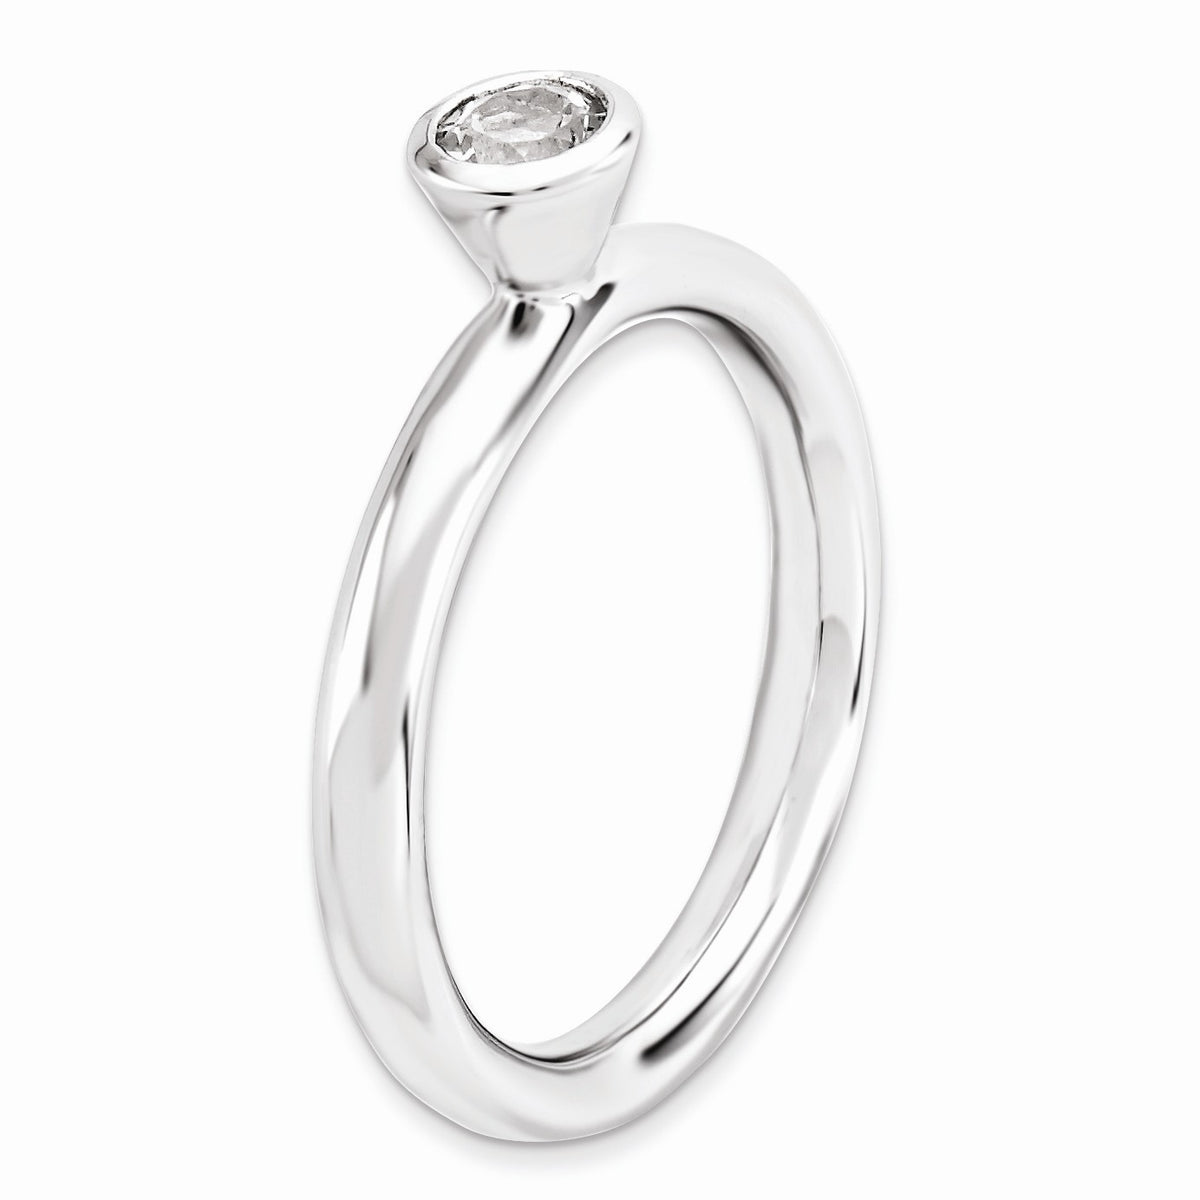 Alternate view of the Stackable High Profile 4mm White Topaz Silver Ring by The Black Bow Jewelry Co.